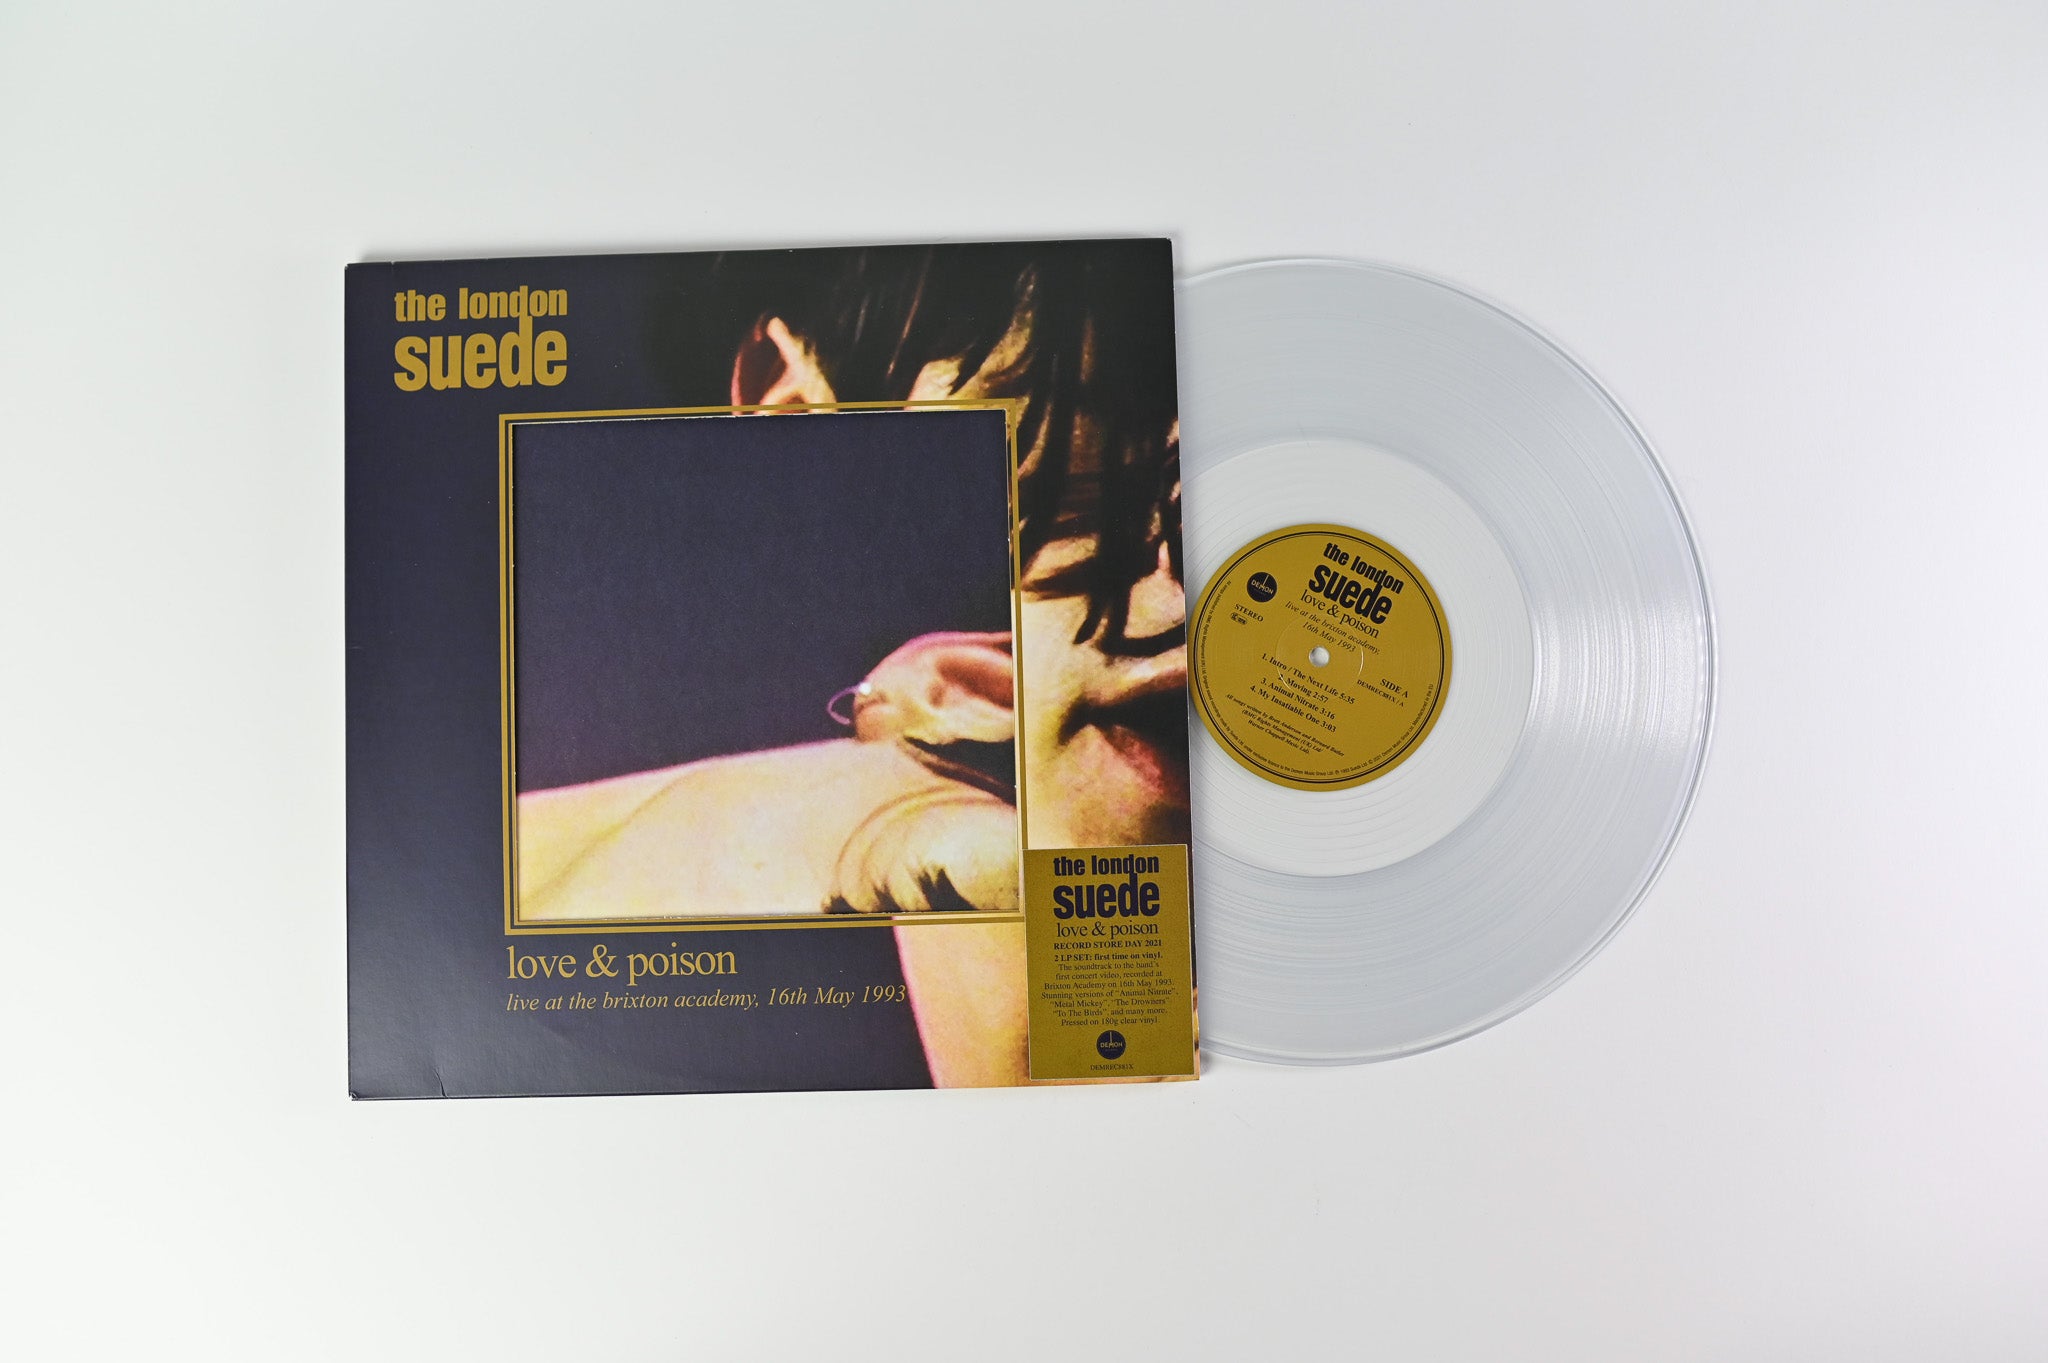 Suede - Love & Poison (Live At The Brixton Academy, 16th May 1993) on Demon Records - Clear Vinyl